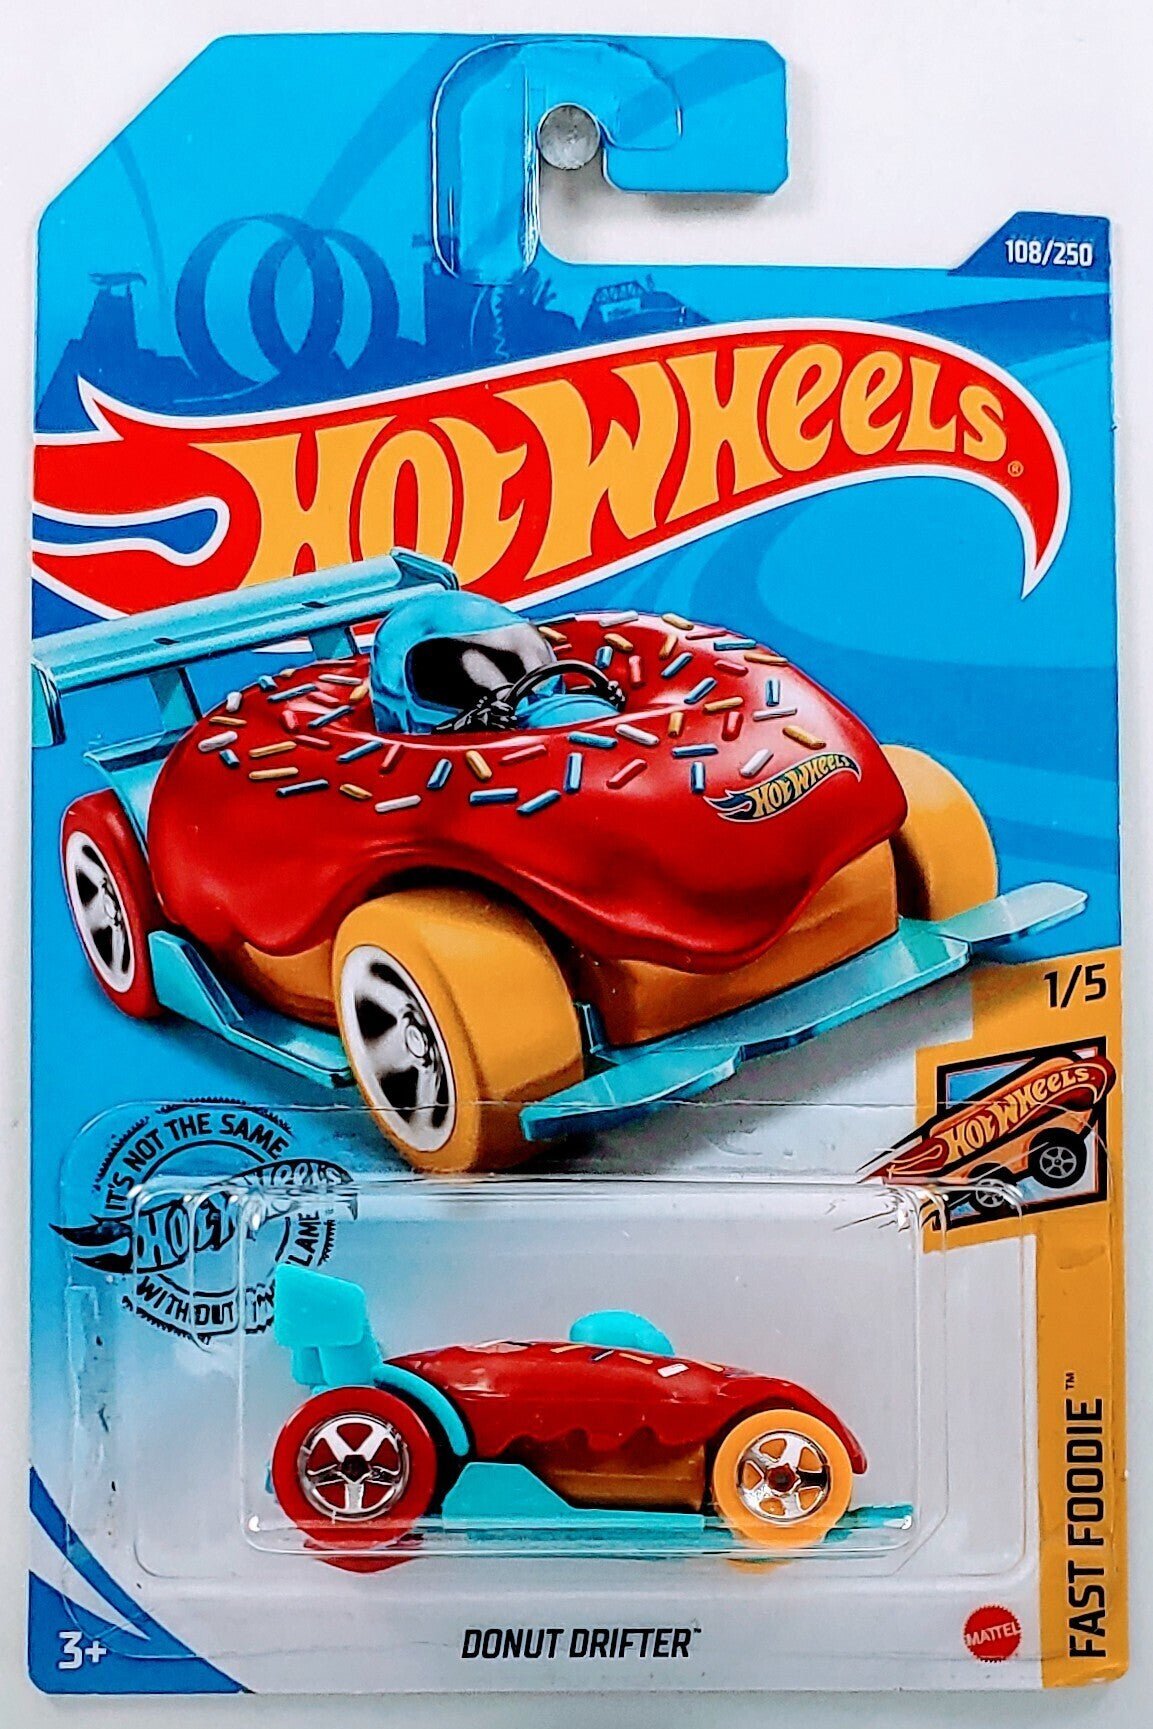 Hot Wheels 2020 - Collector # 108/250 - Fast Foodie 1/5 - New Models - Donut Drifter - Red & Blue with Sprinkles - IC